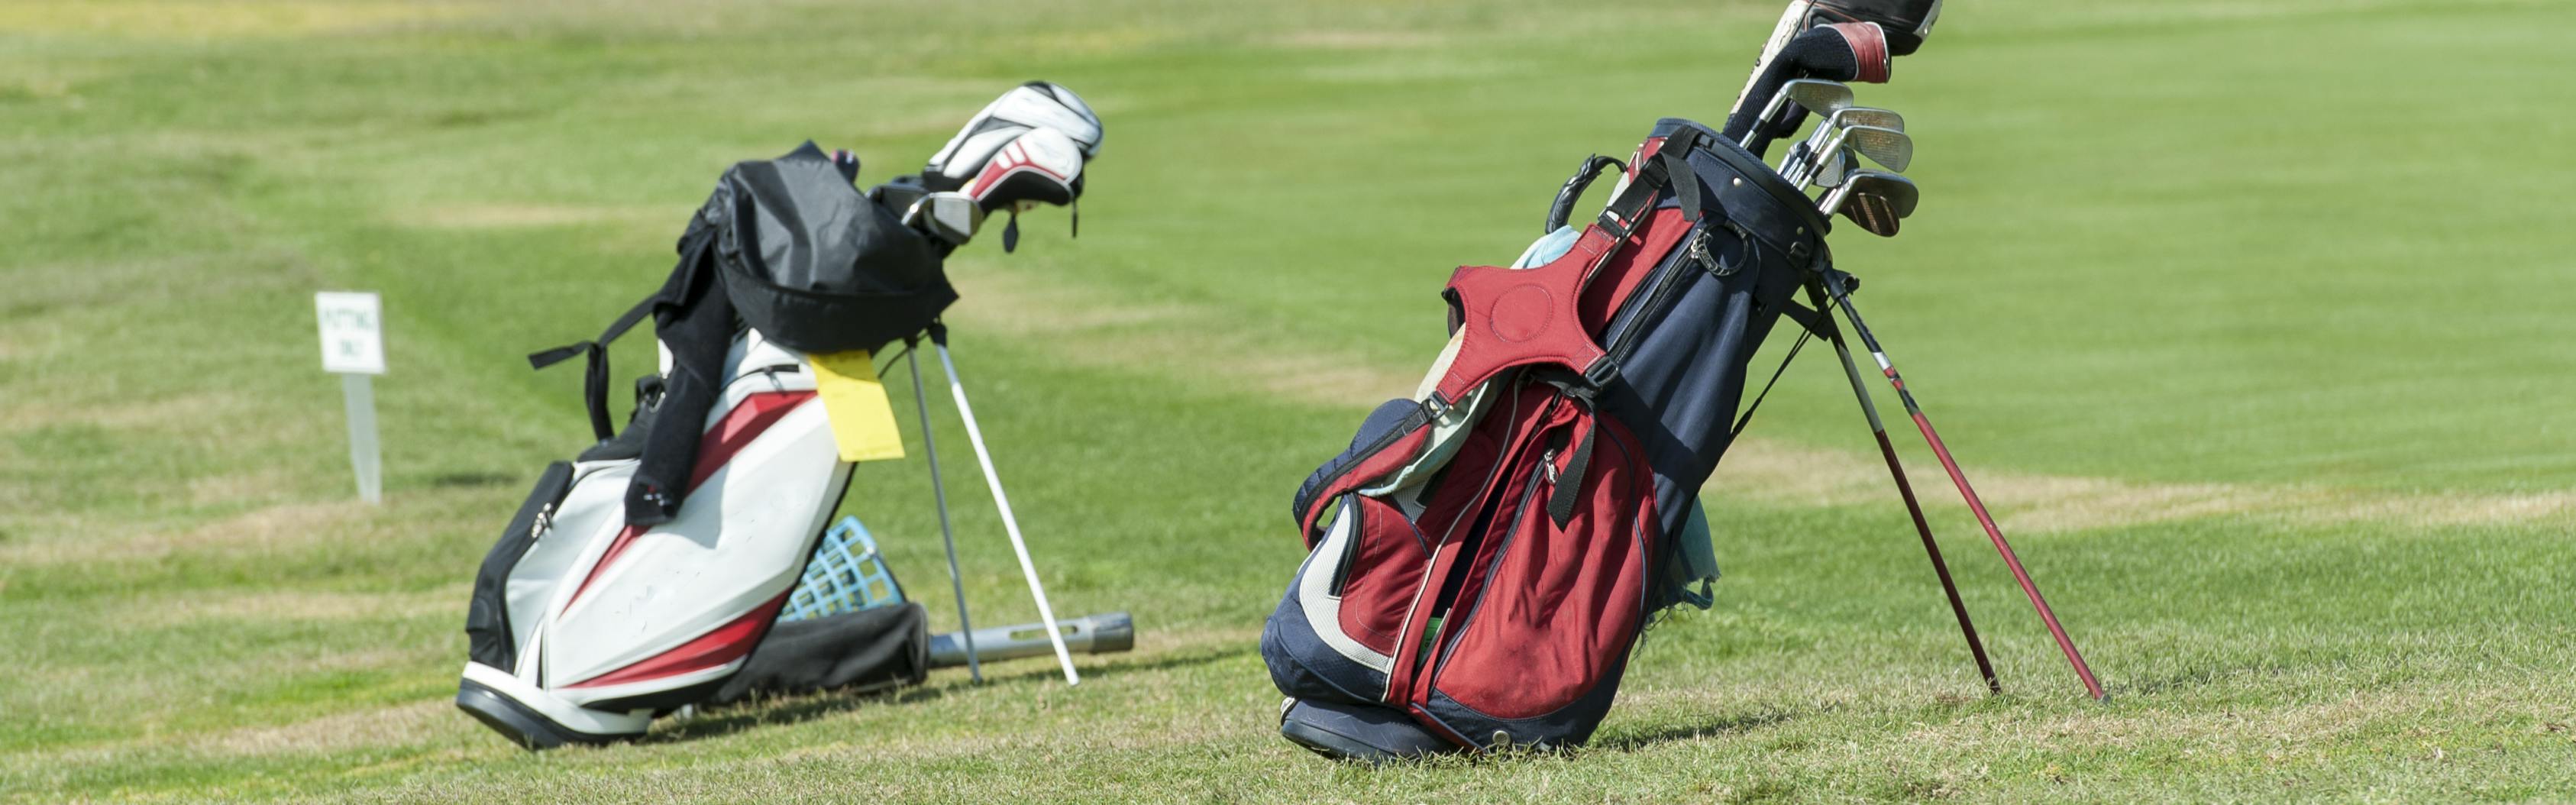 Two golf bags sitting on grass. One is red white and blue and one is red and white.